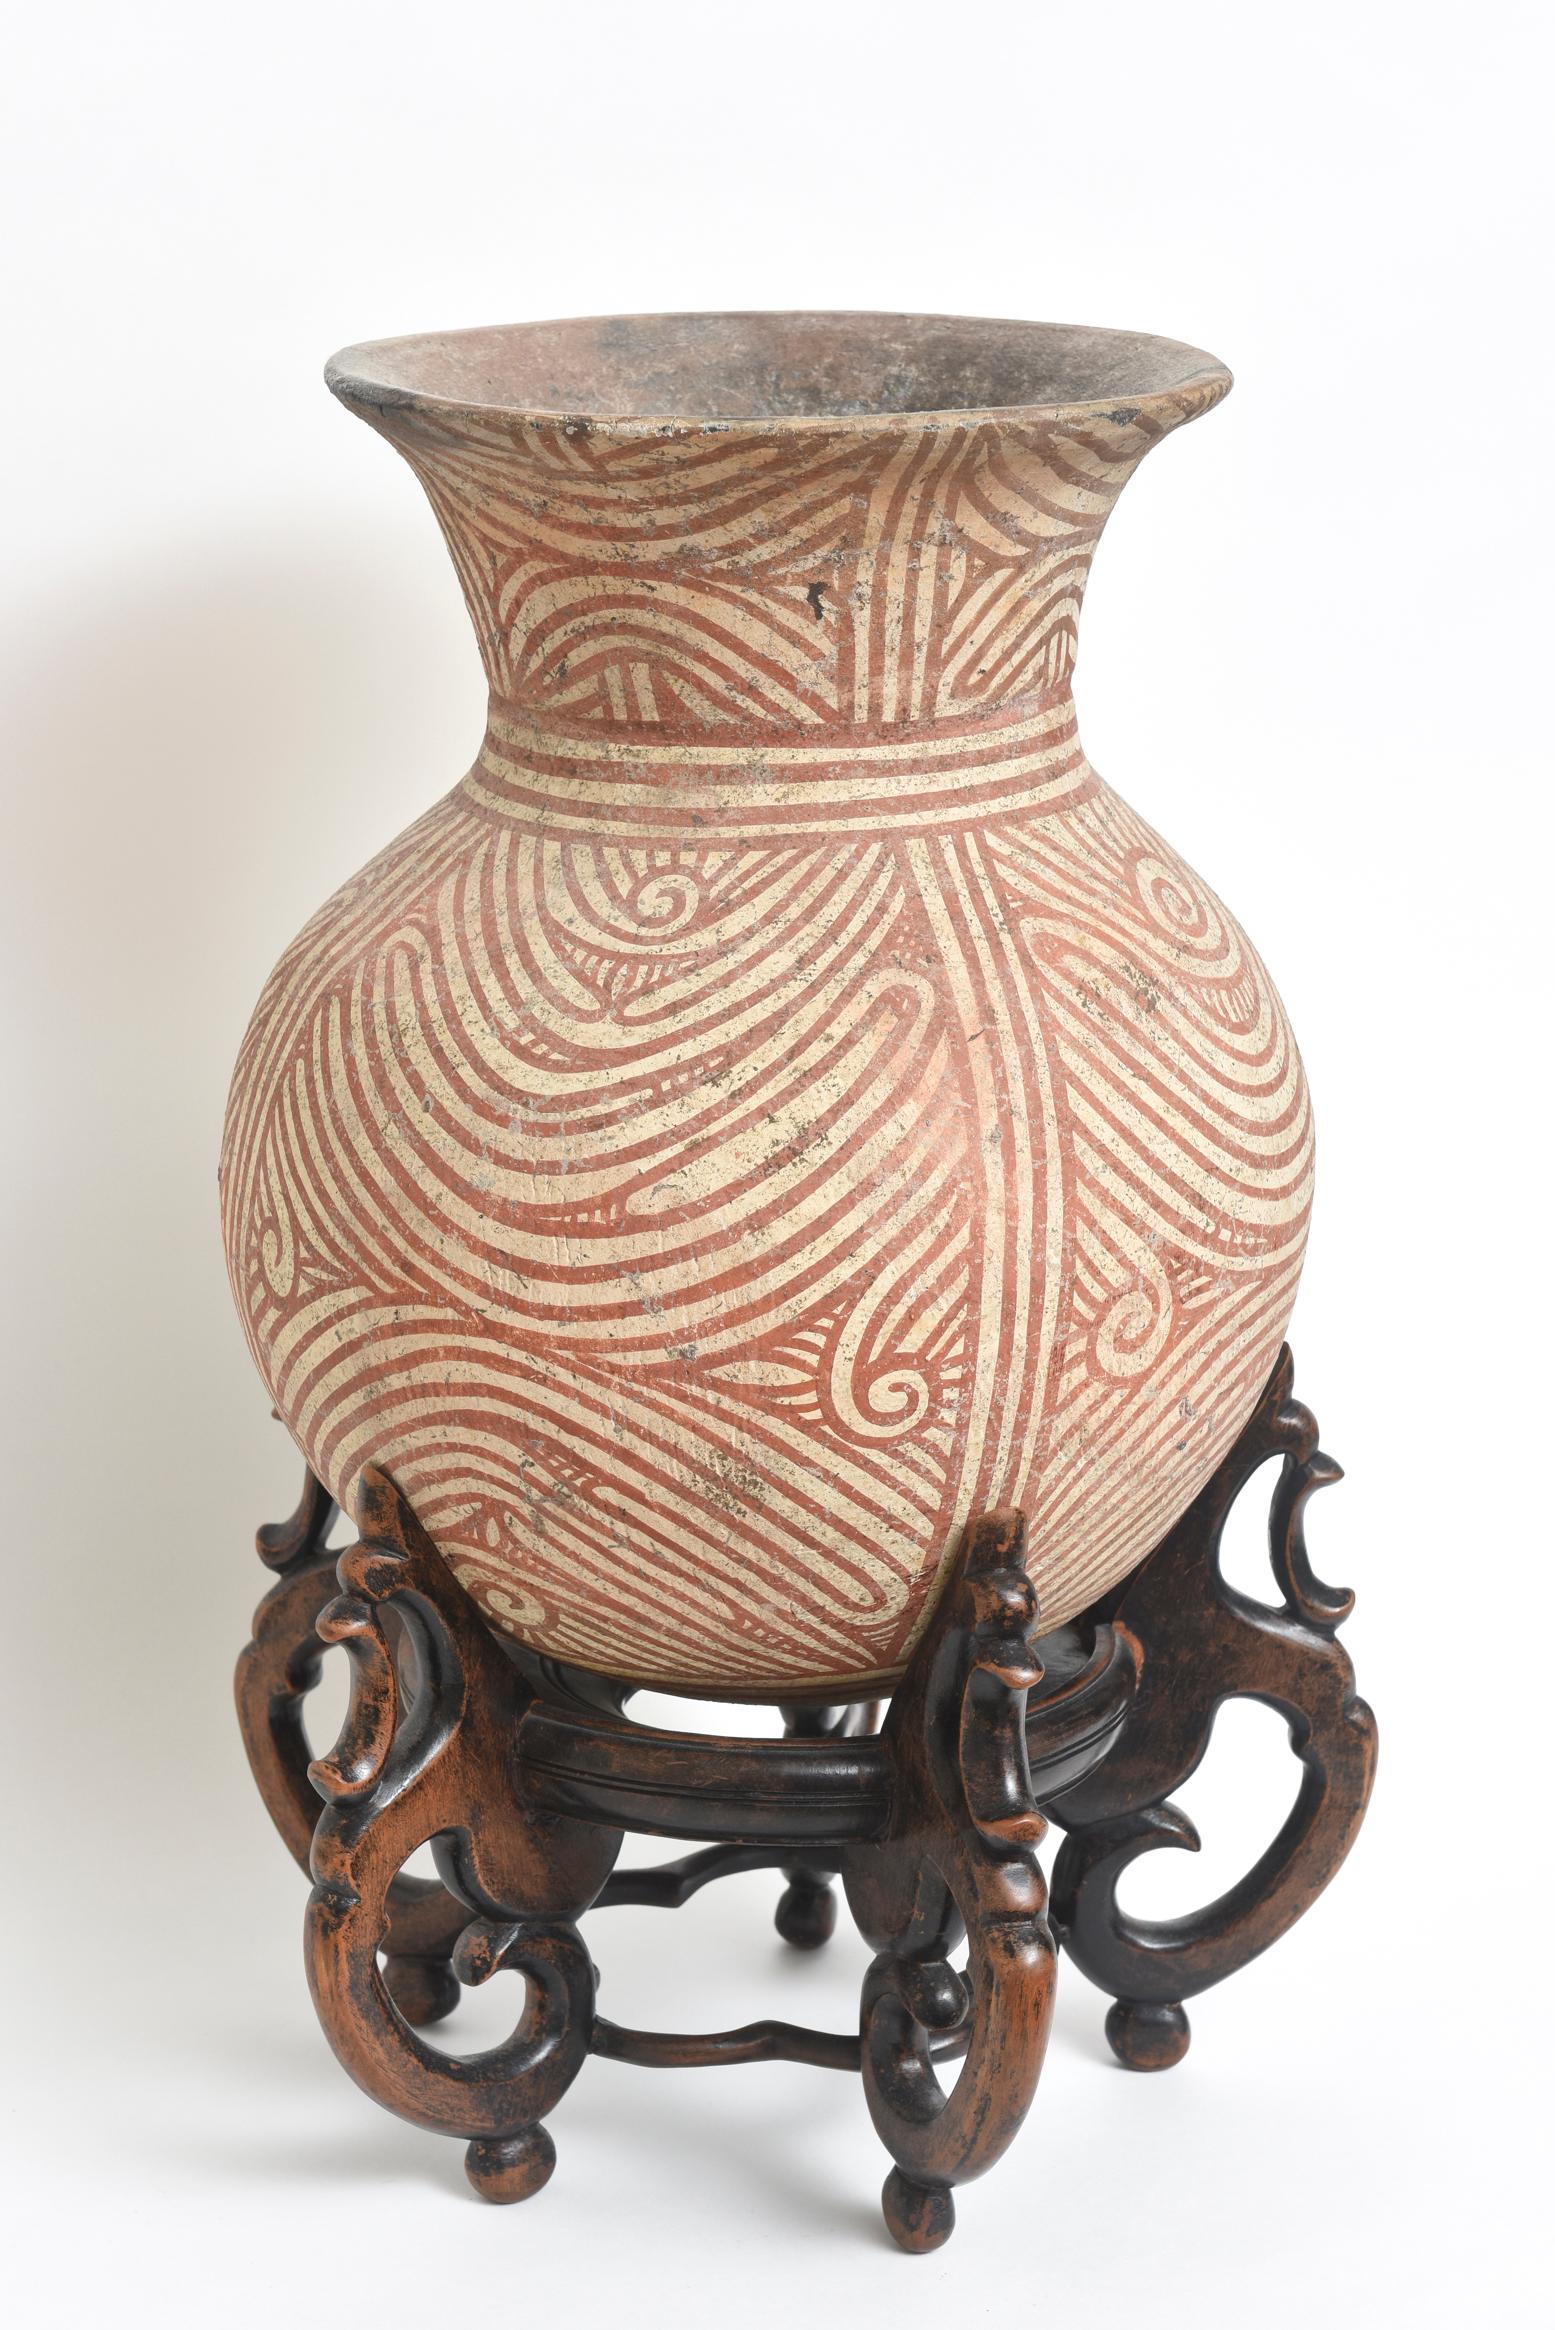 Ancient pottery vessel with a wide body and flared rim. The decoration is done by hand in a darker terra cotta color.
